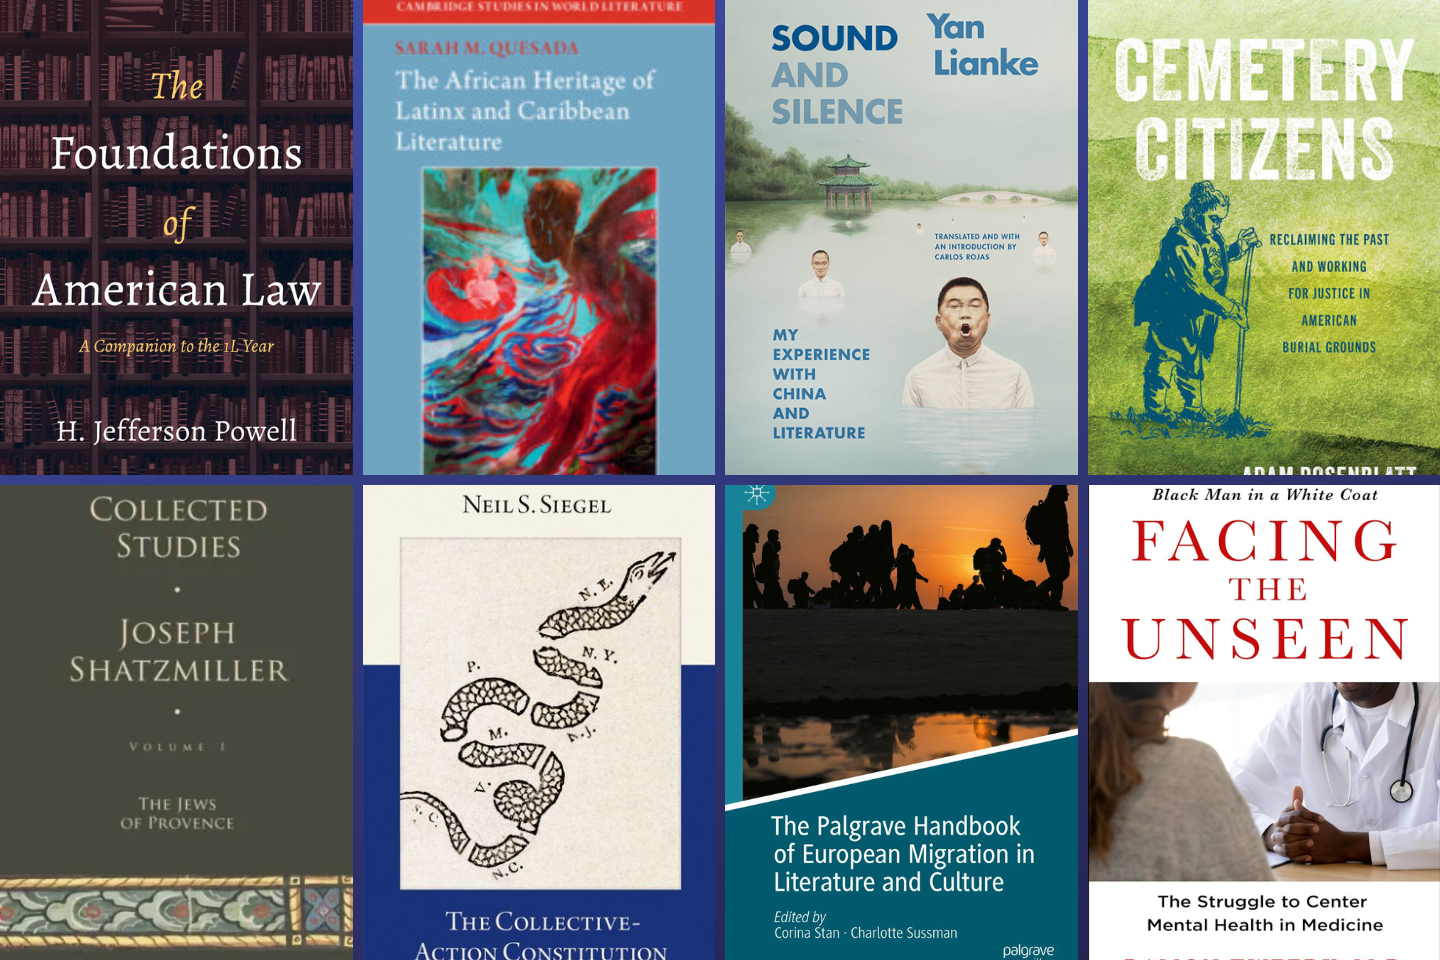 Books: Foundations of American Law; The African Heritage of Latinx and Caribbean Literature; Sound and Silence; The Jews in Provence, The Collective-Action Constitution; The Palgrave Handbook of European Migration in Literature and Culture; Facing the Unseen; 